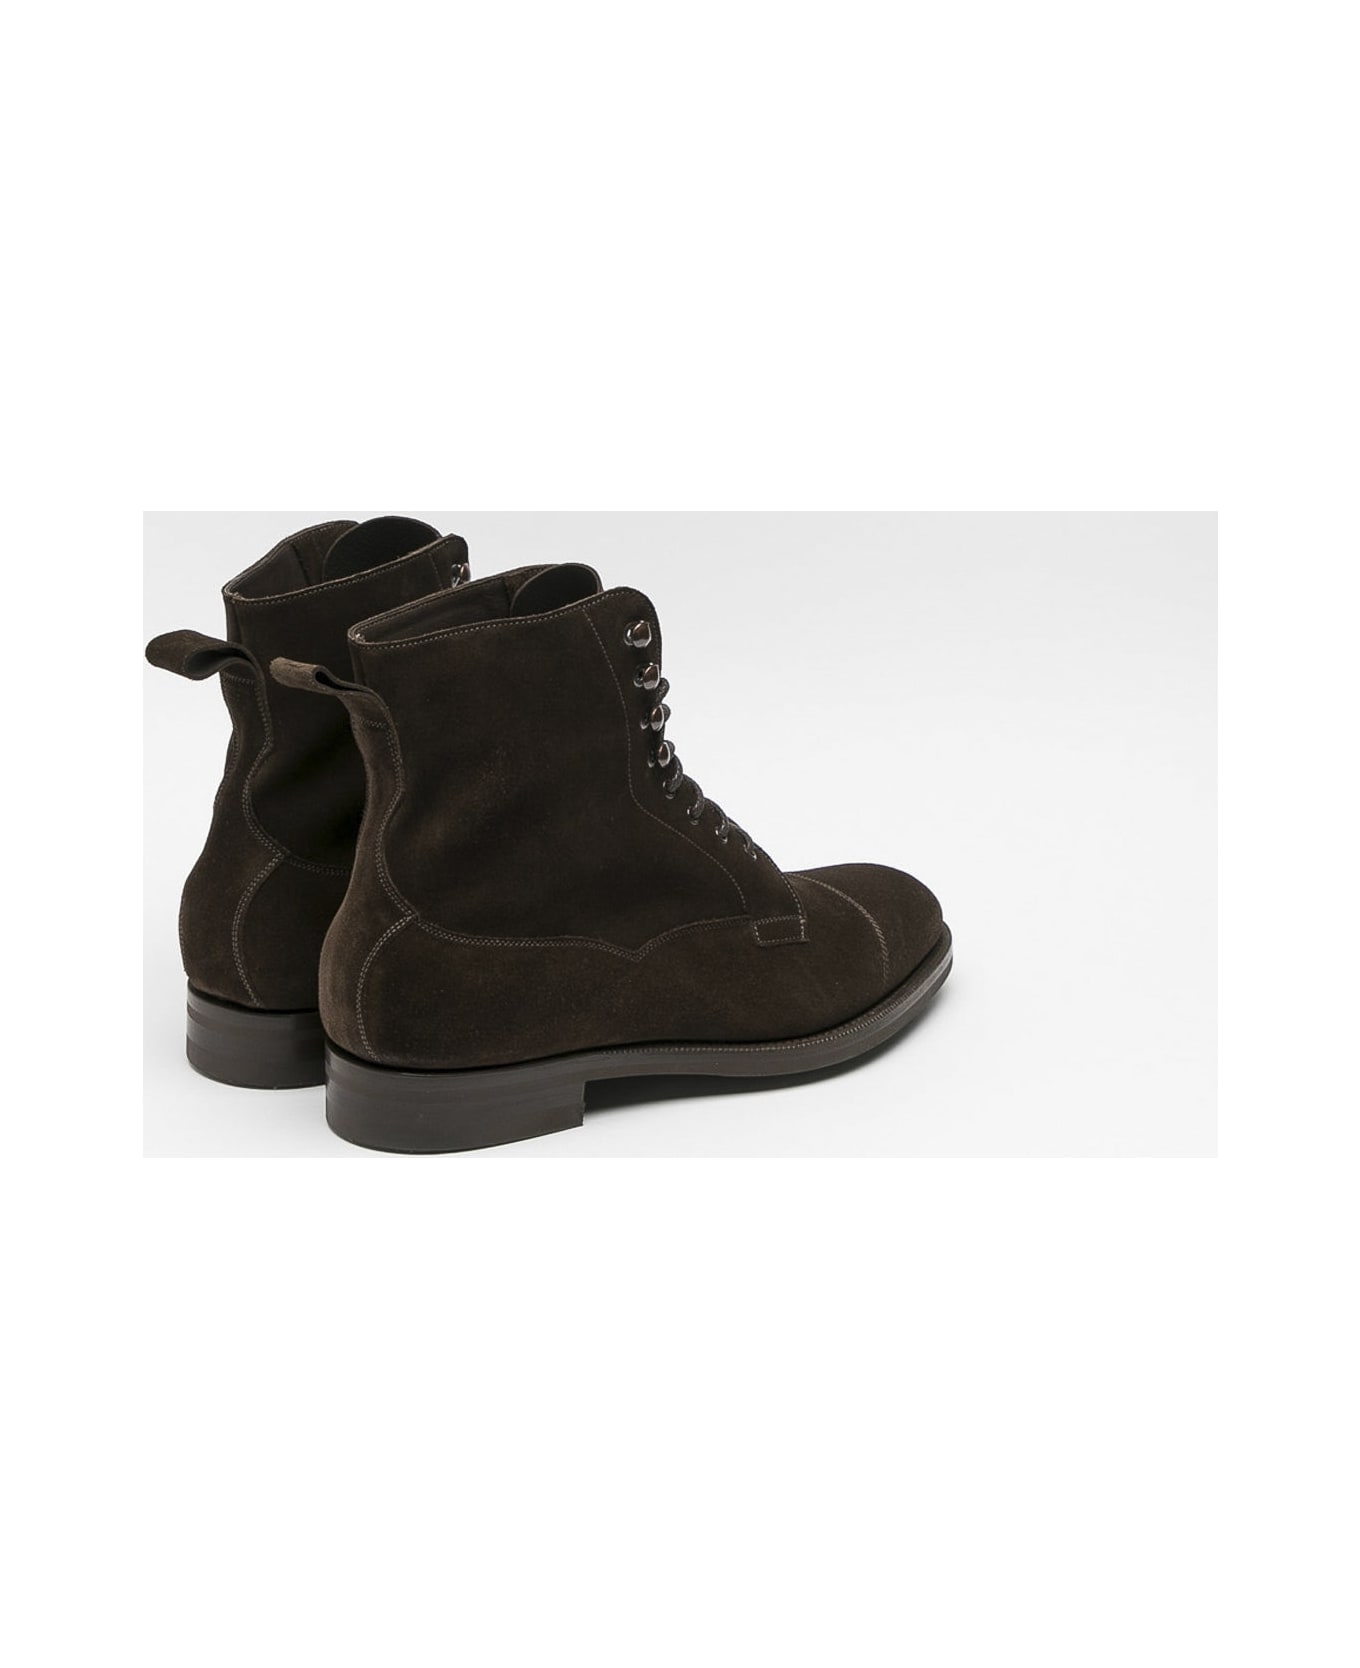 Edward Green Galway Mocca Suede Derby Boot - Marrone ブーツ